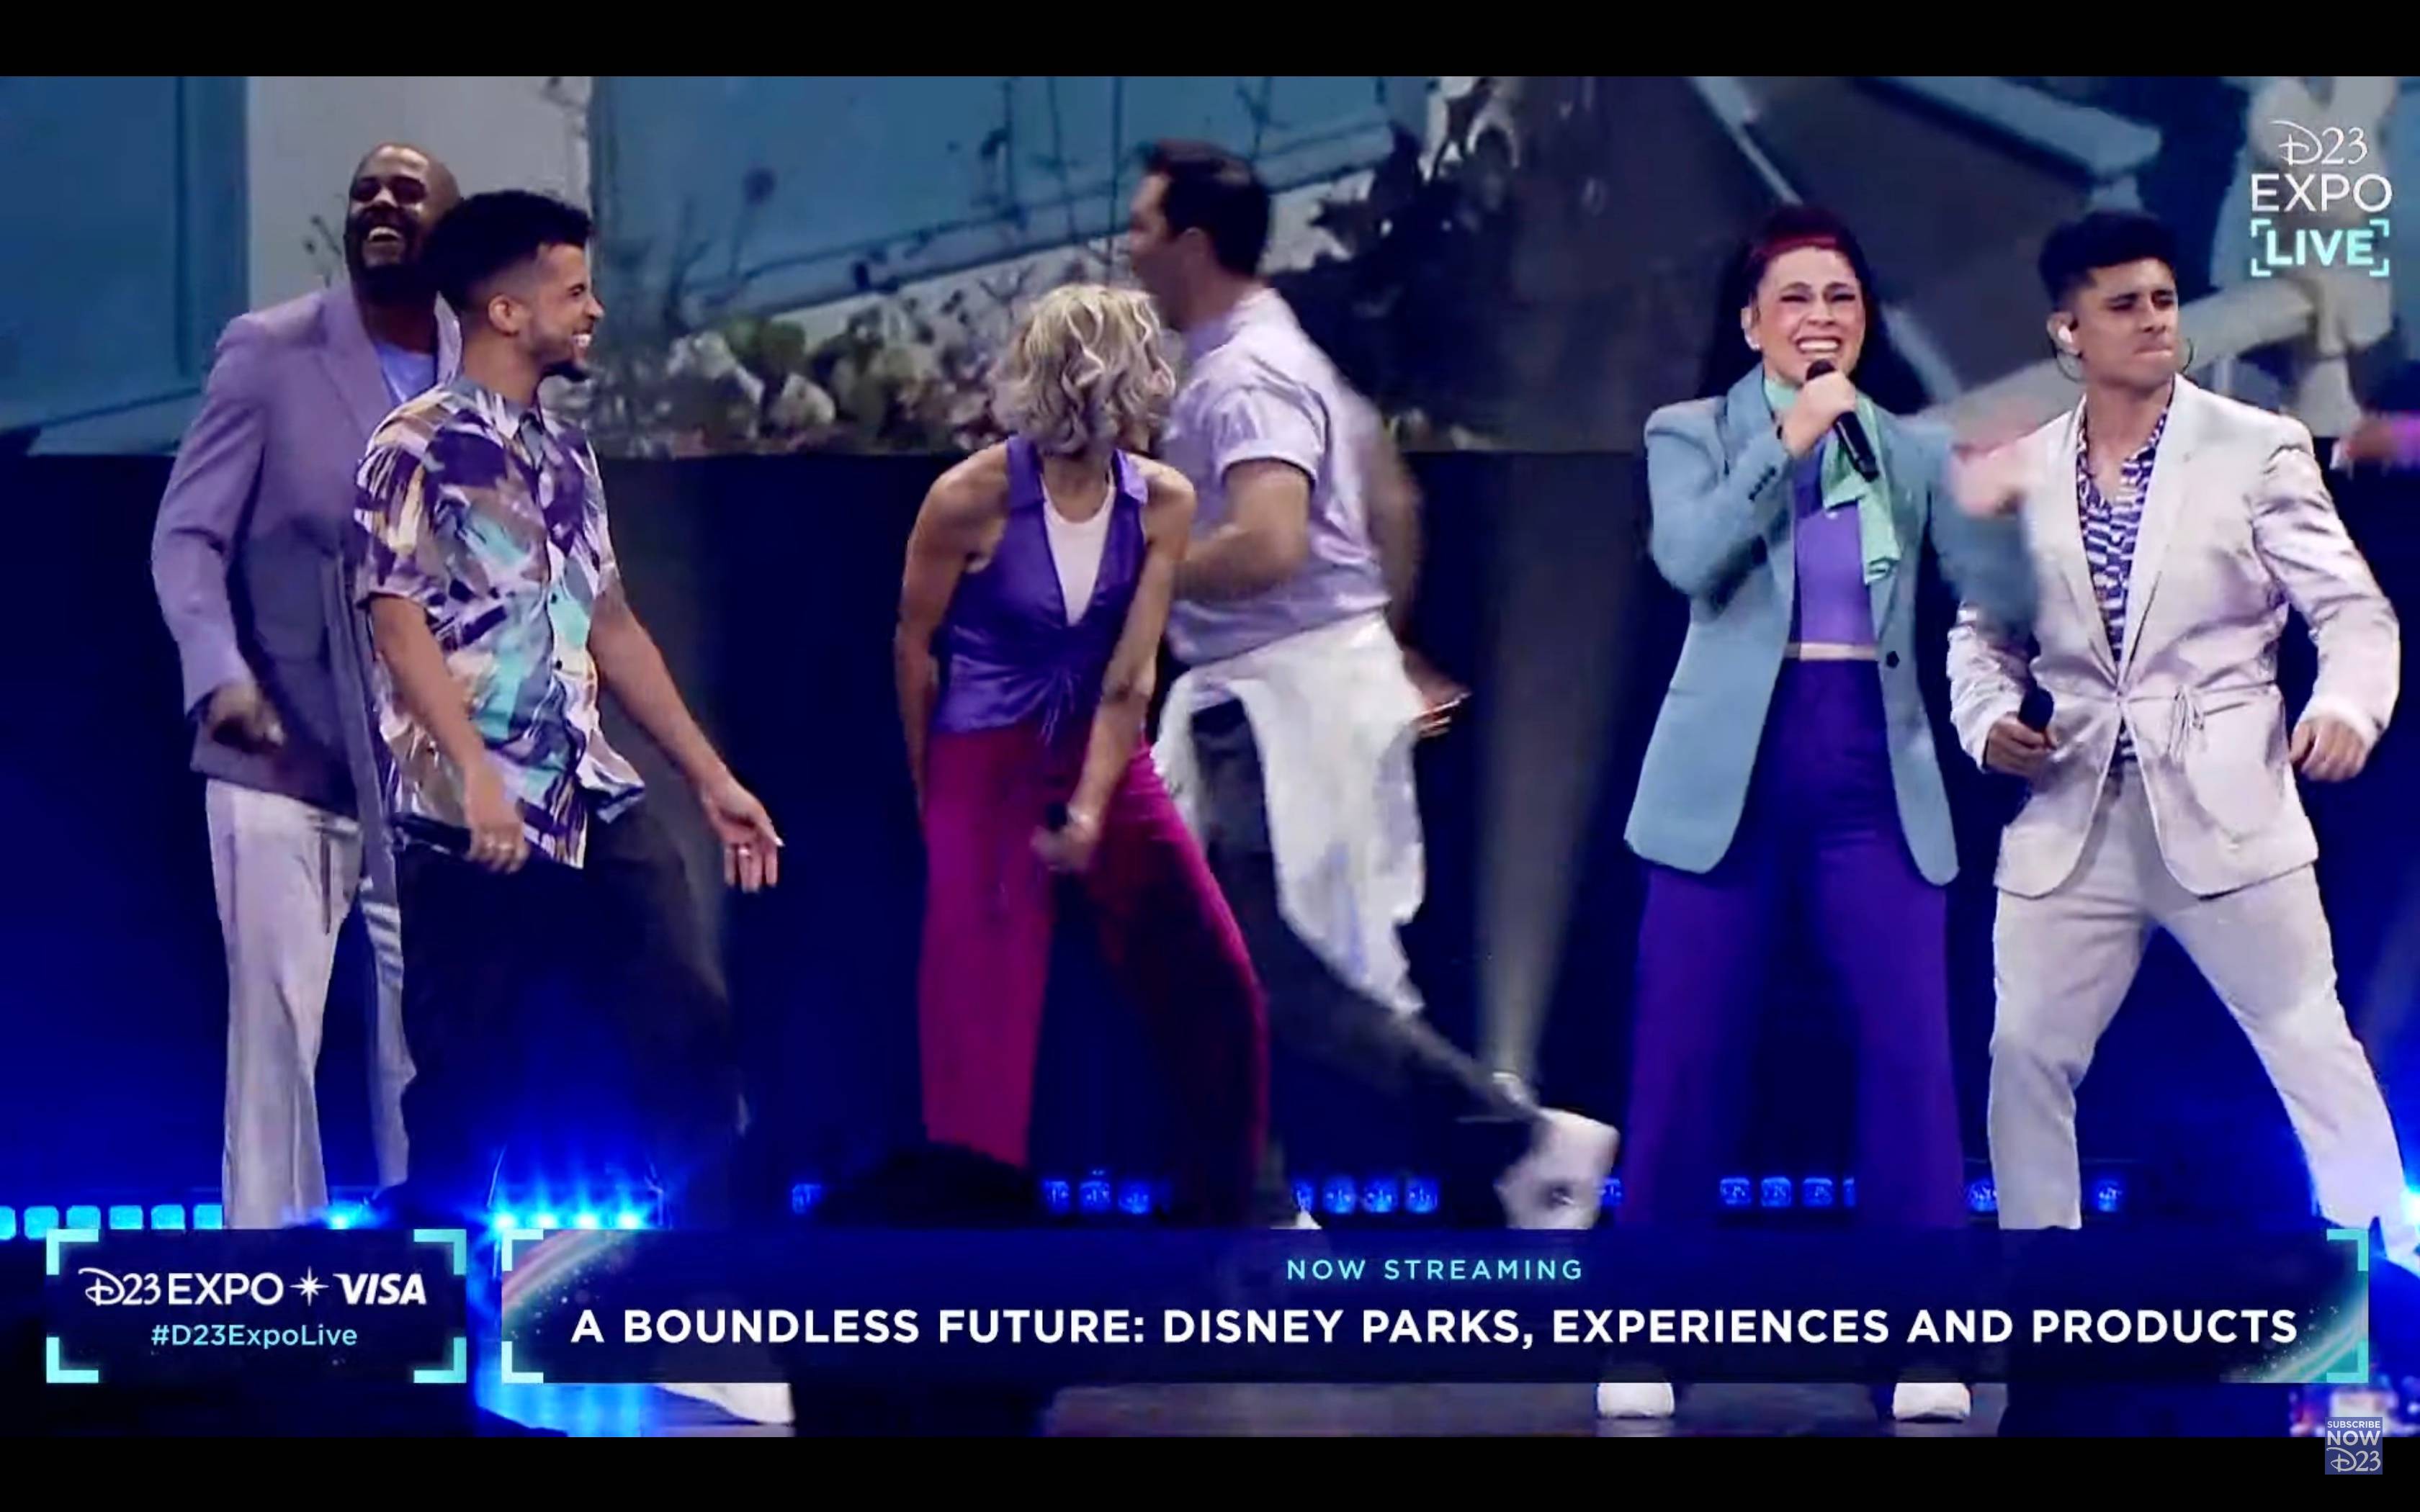 Jordan Fisher and Angie Keilhauer perform 'Happily Ever After' at D23 Expo